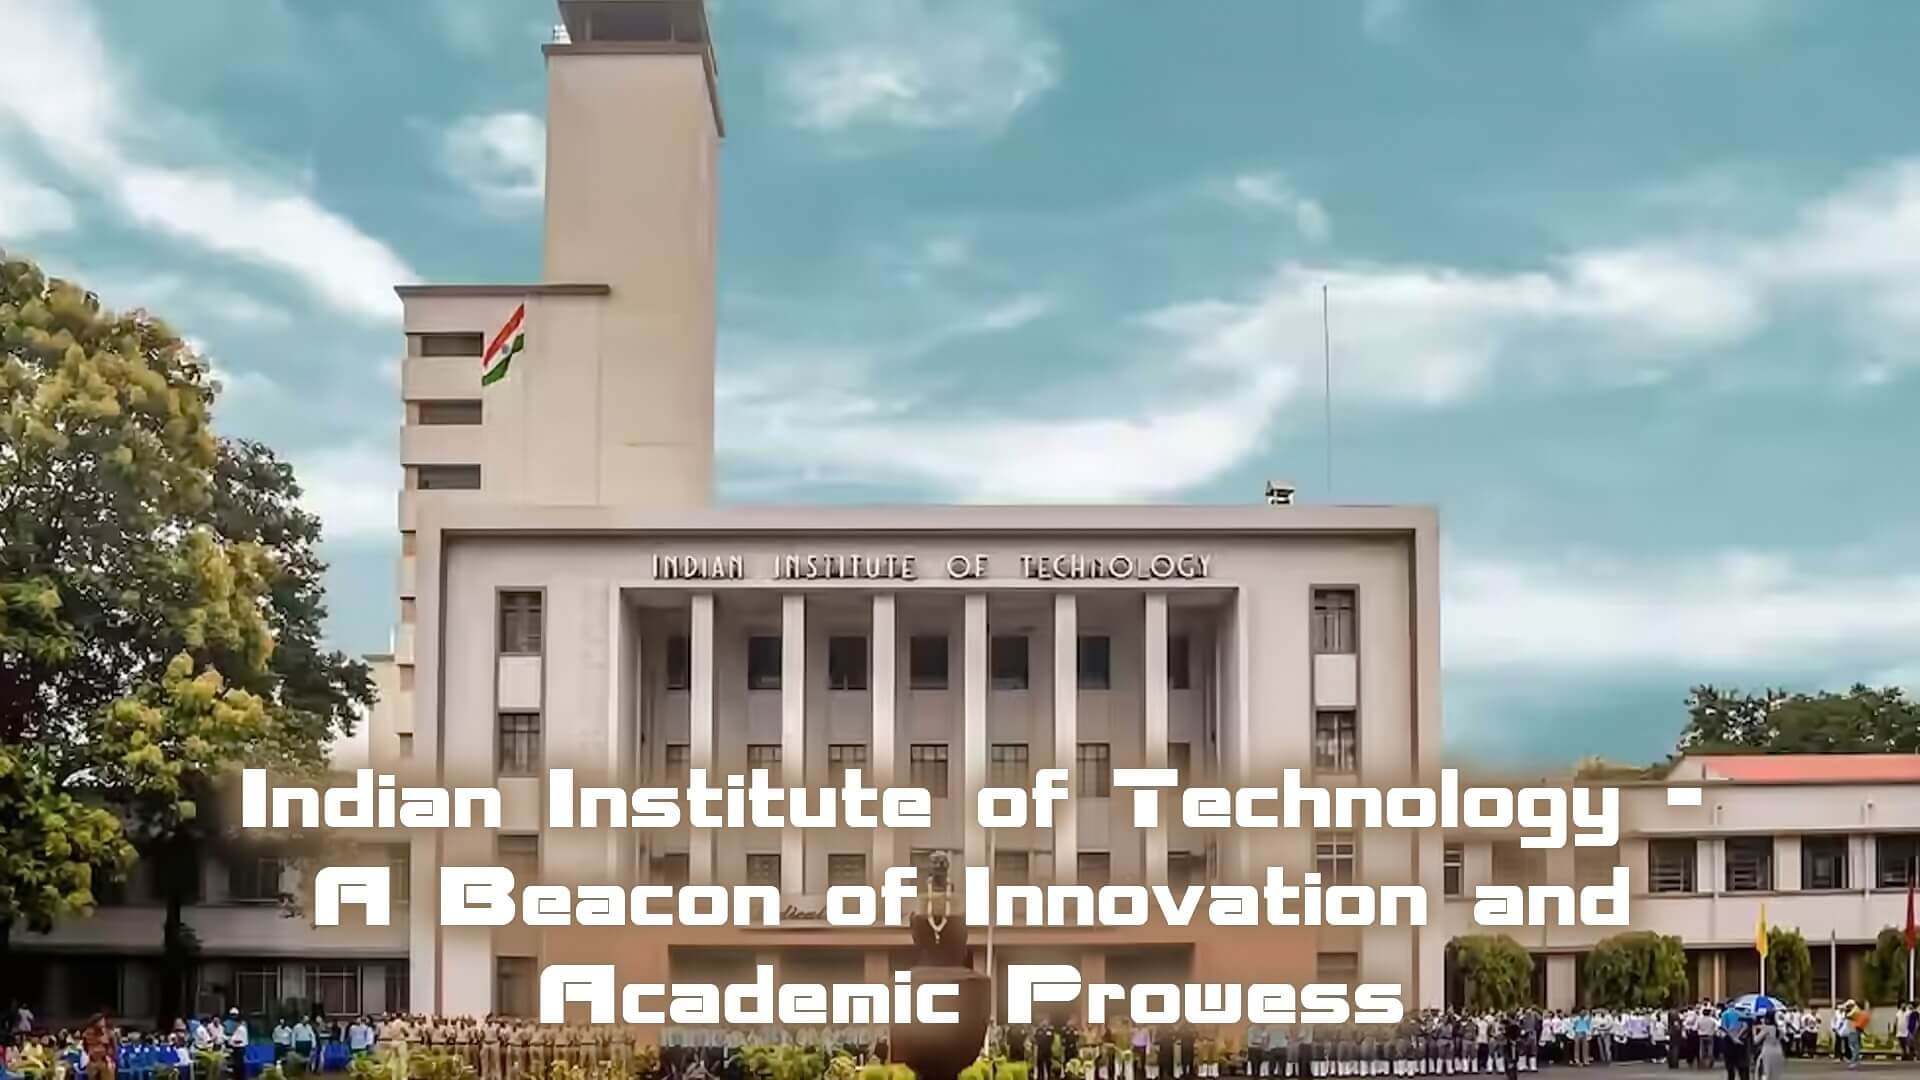 Indian Institute of Technology - A Beacon of Innovation and Academic Prowess